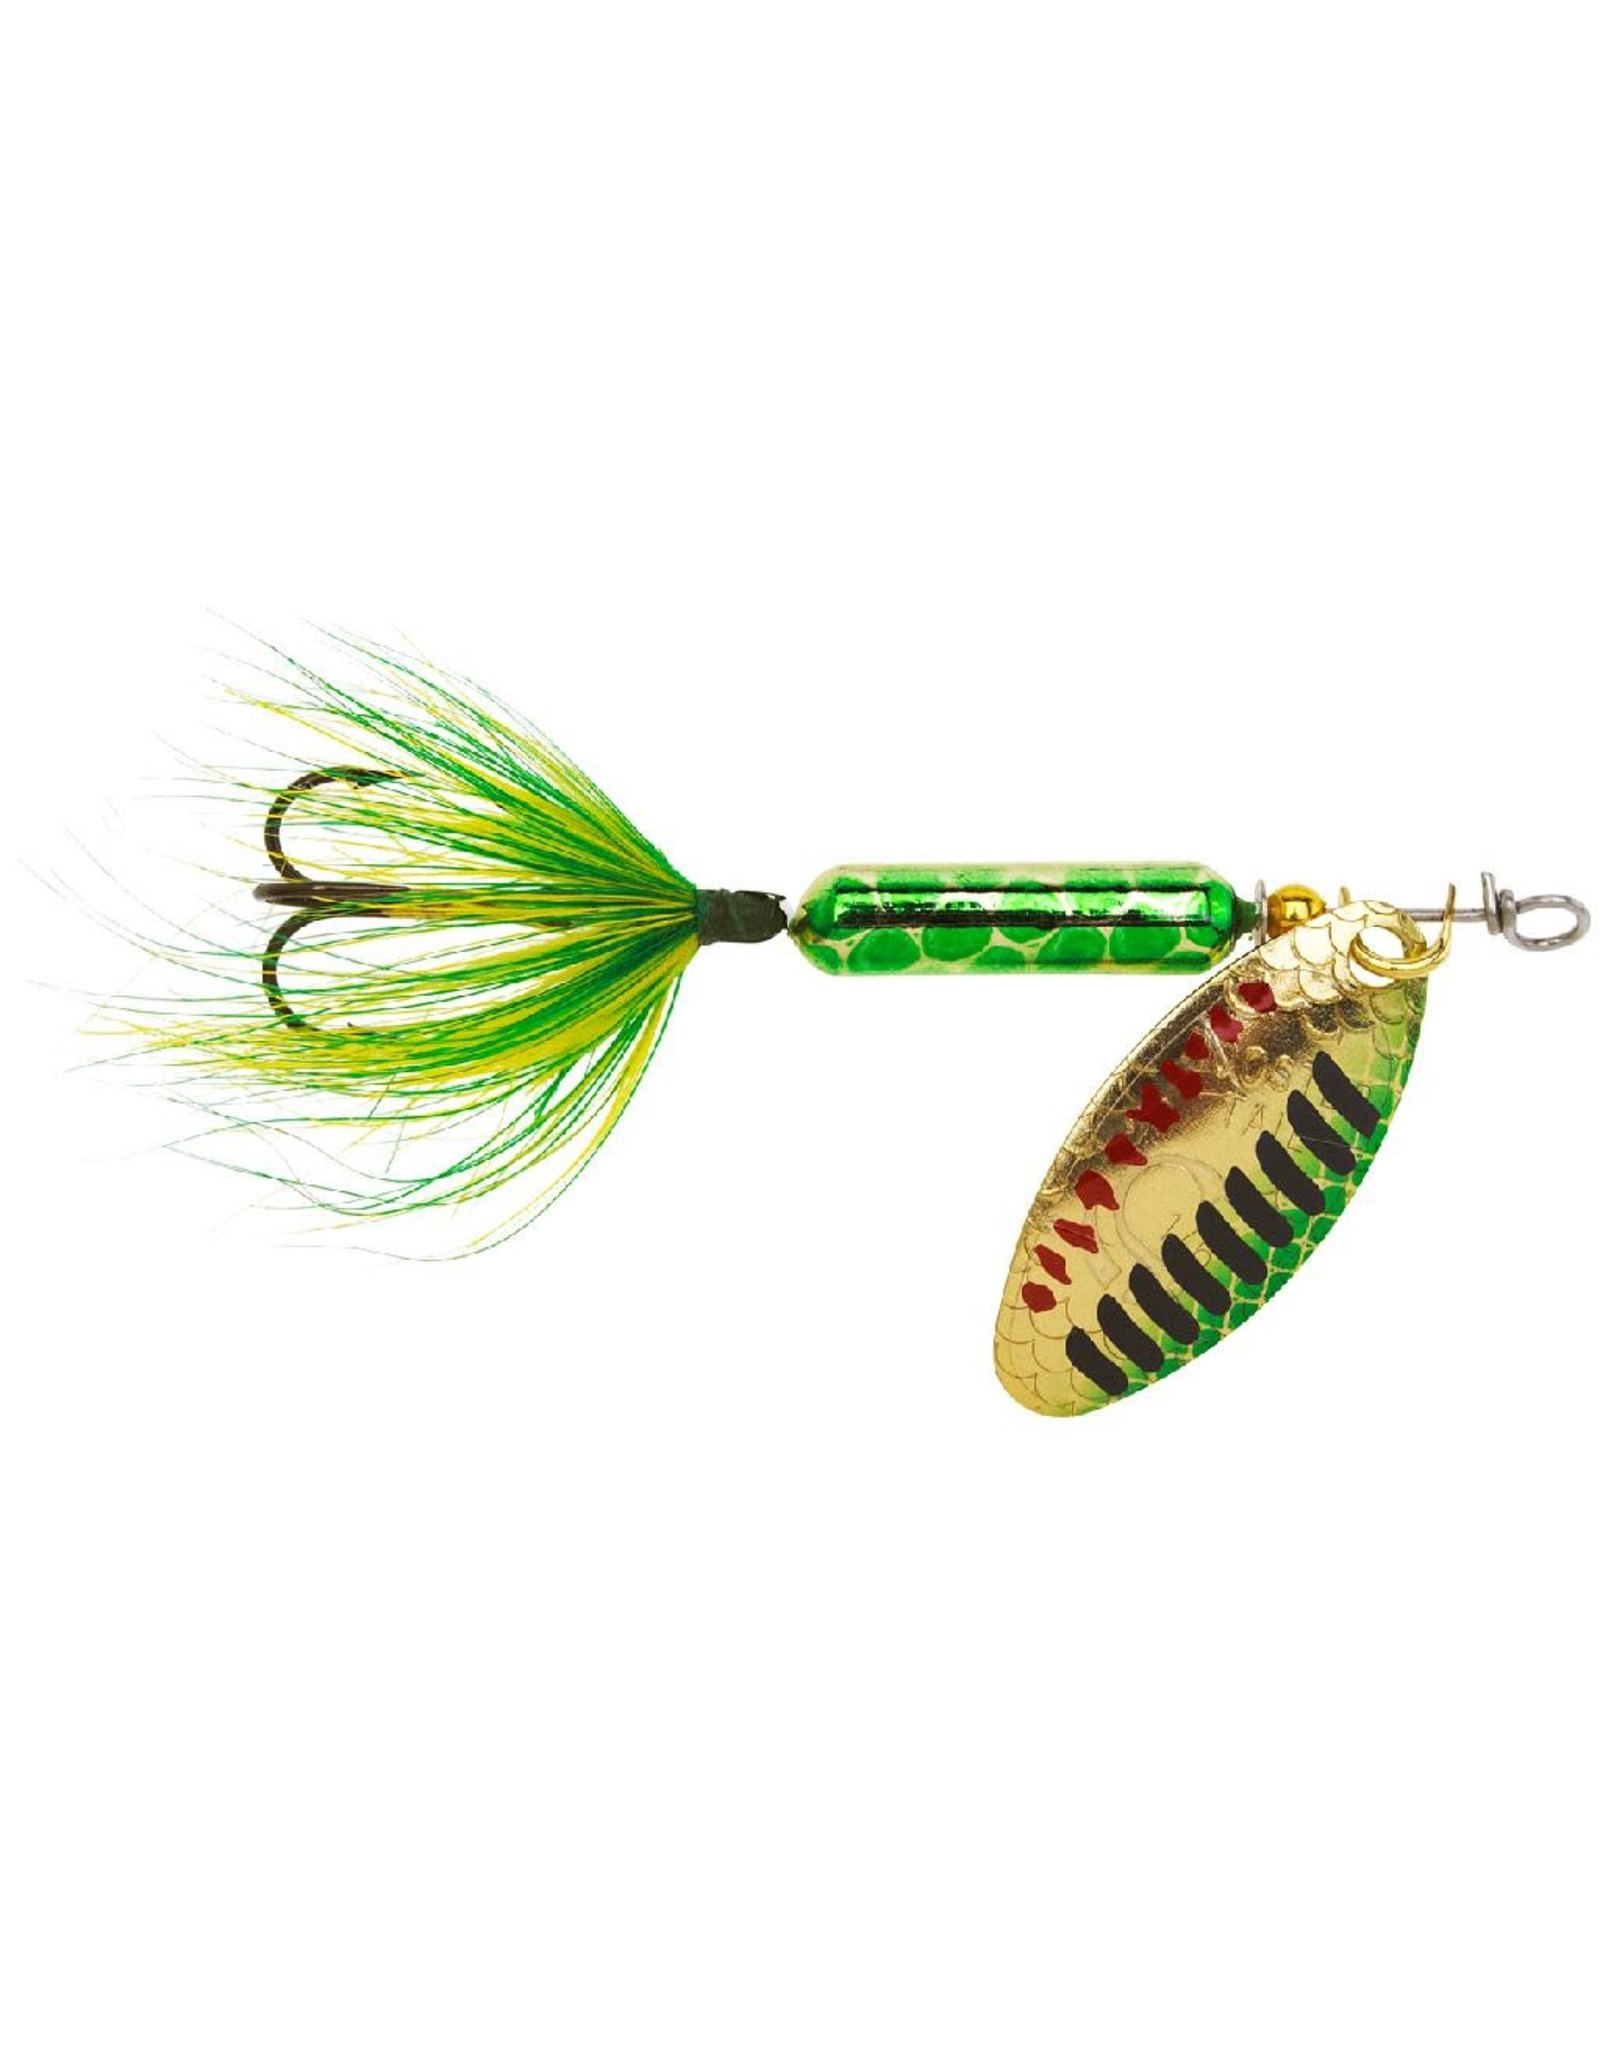 Worden's Rooster Tail 1/8 Oz. 208 - Metallic Gold & Green Pirate